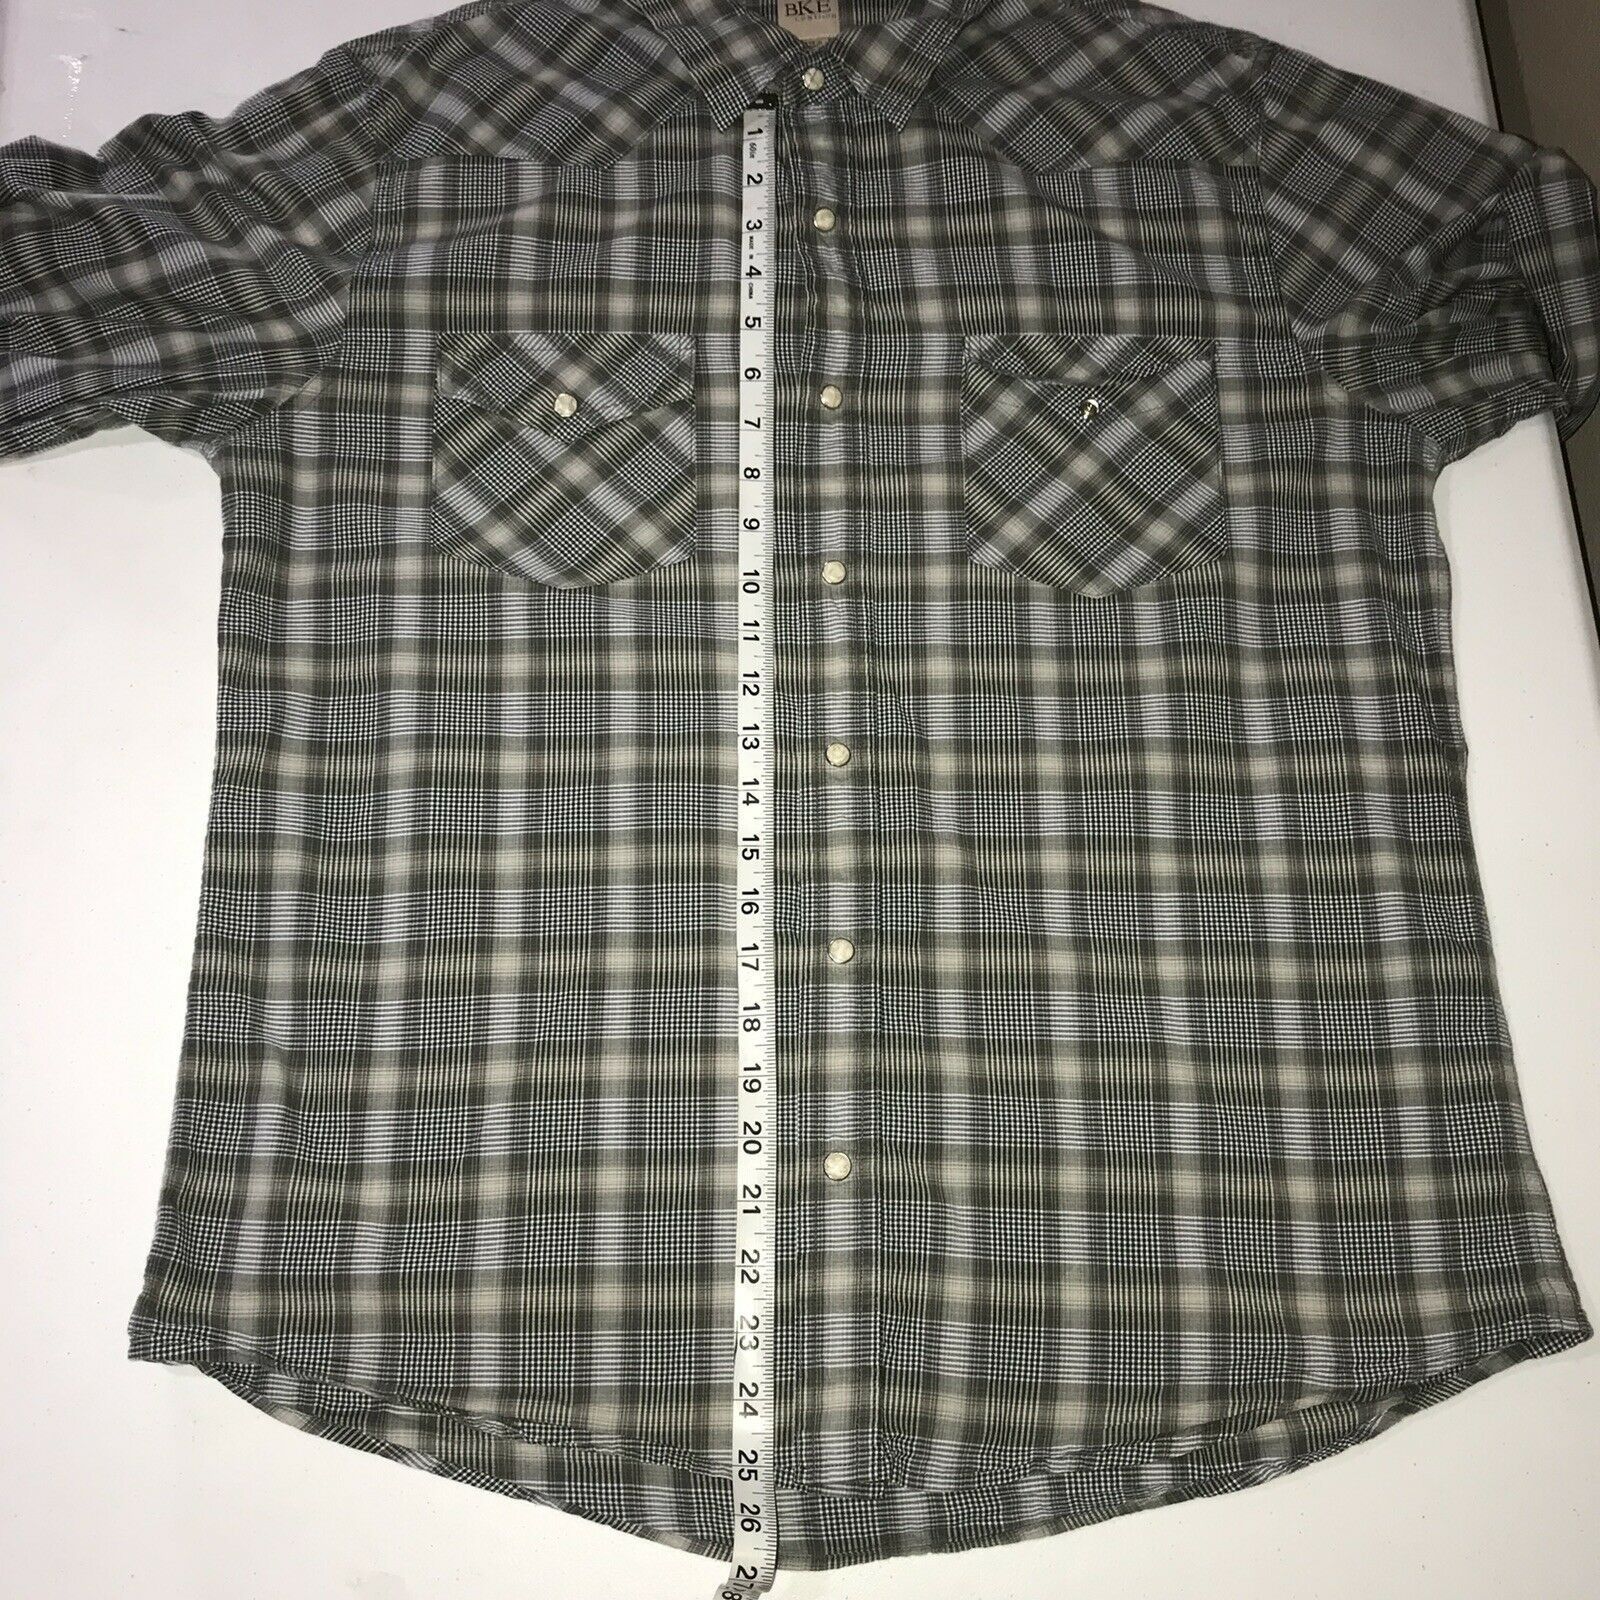 Bke Mens Bke Western Pearl Snap Shirt Size Large Size US L / EU 52-54 / 3 - 5 Preview